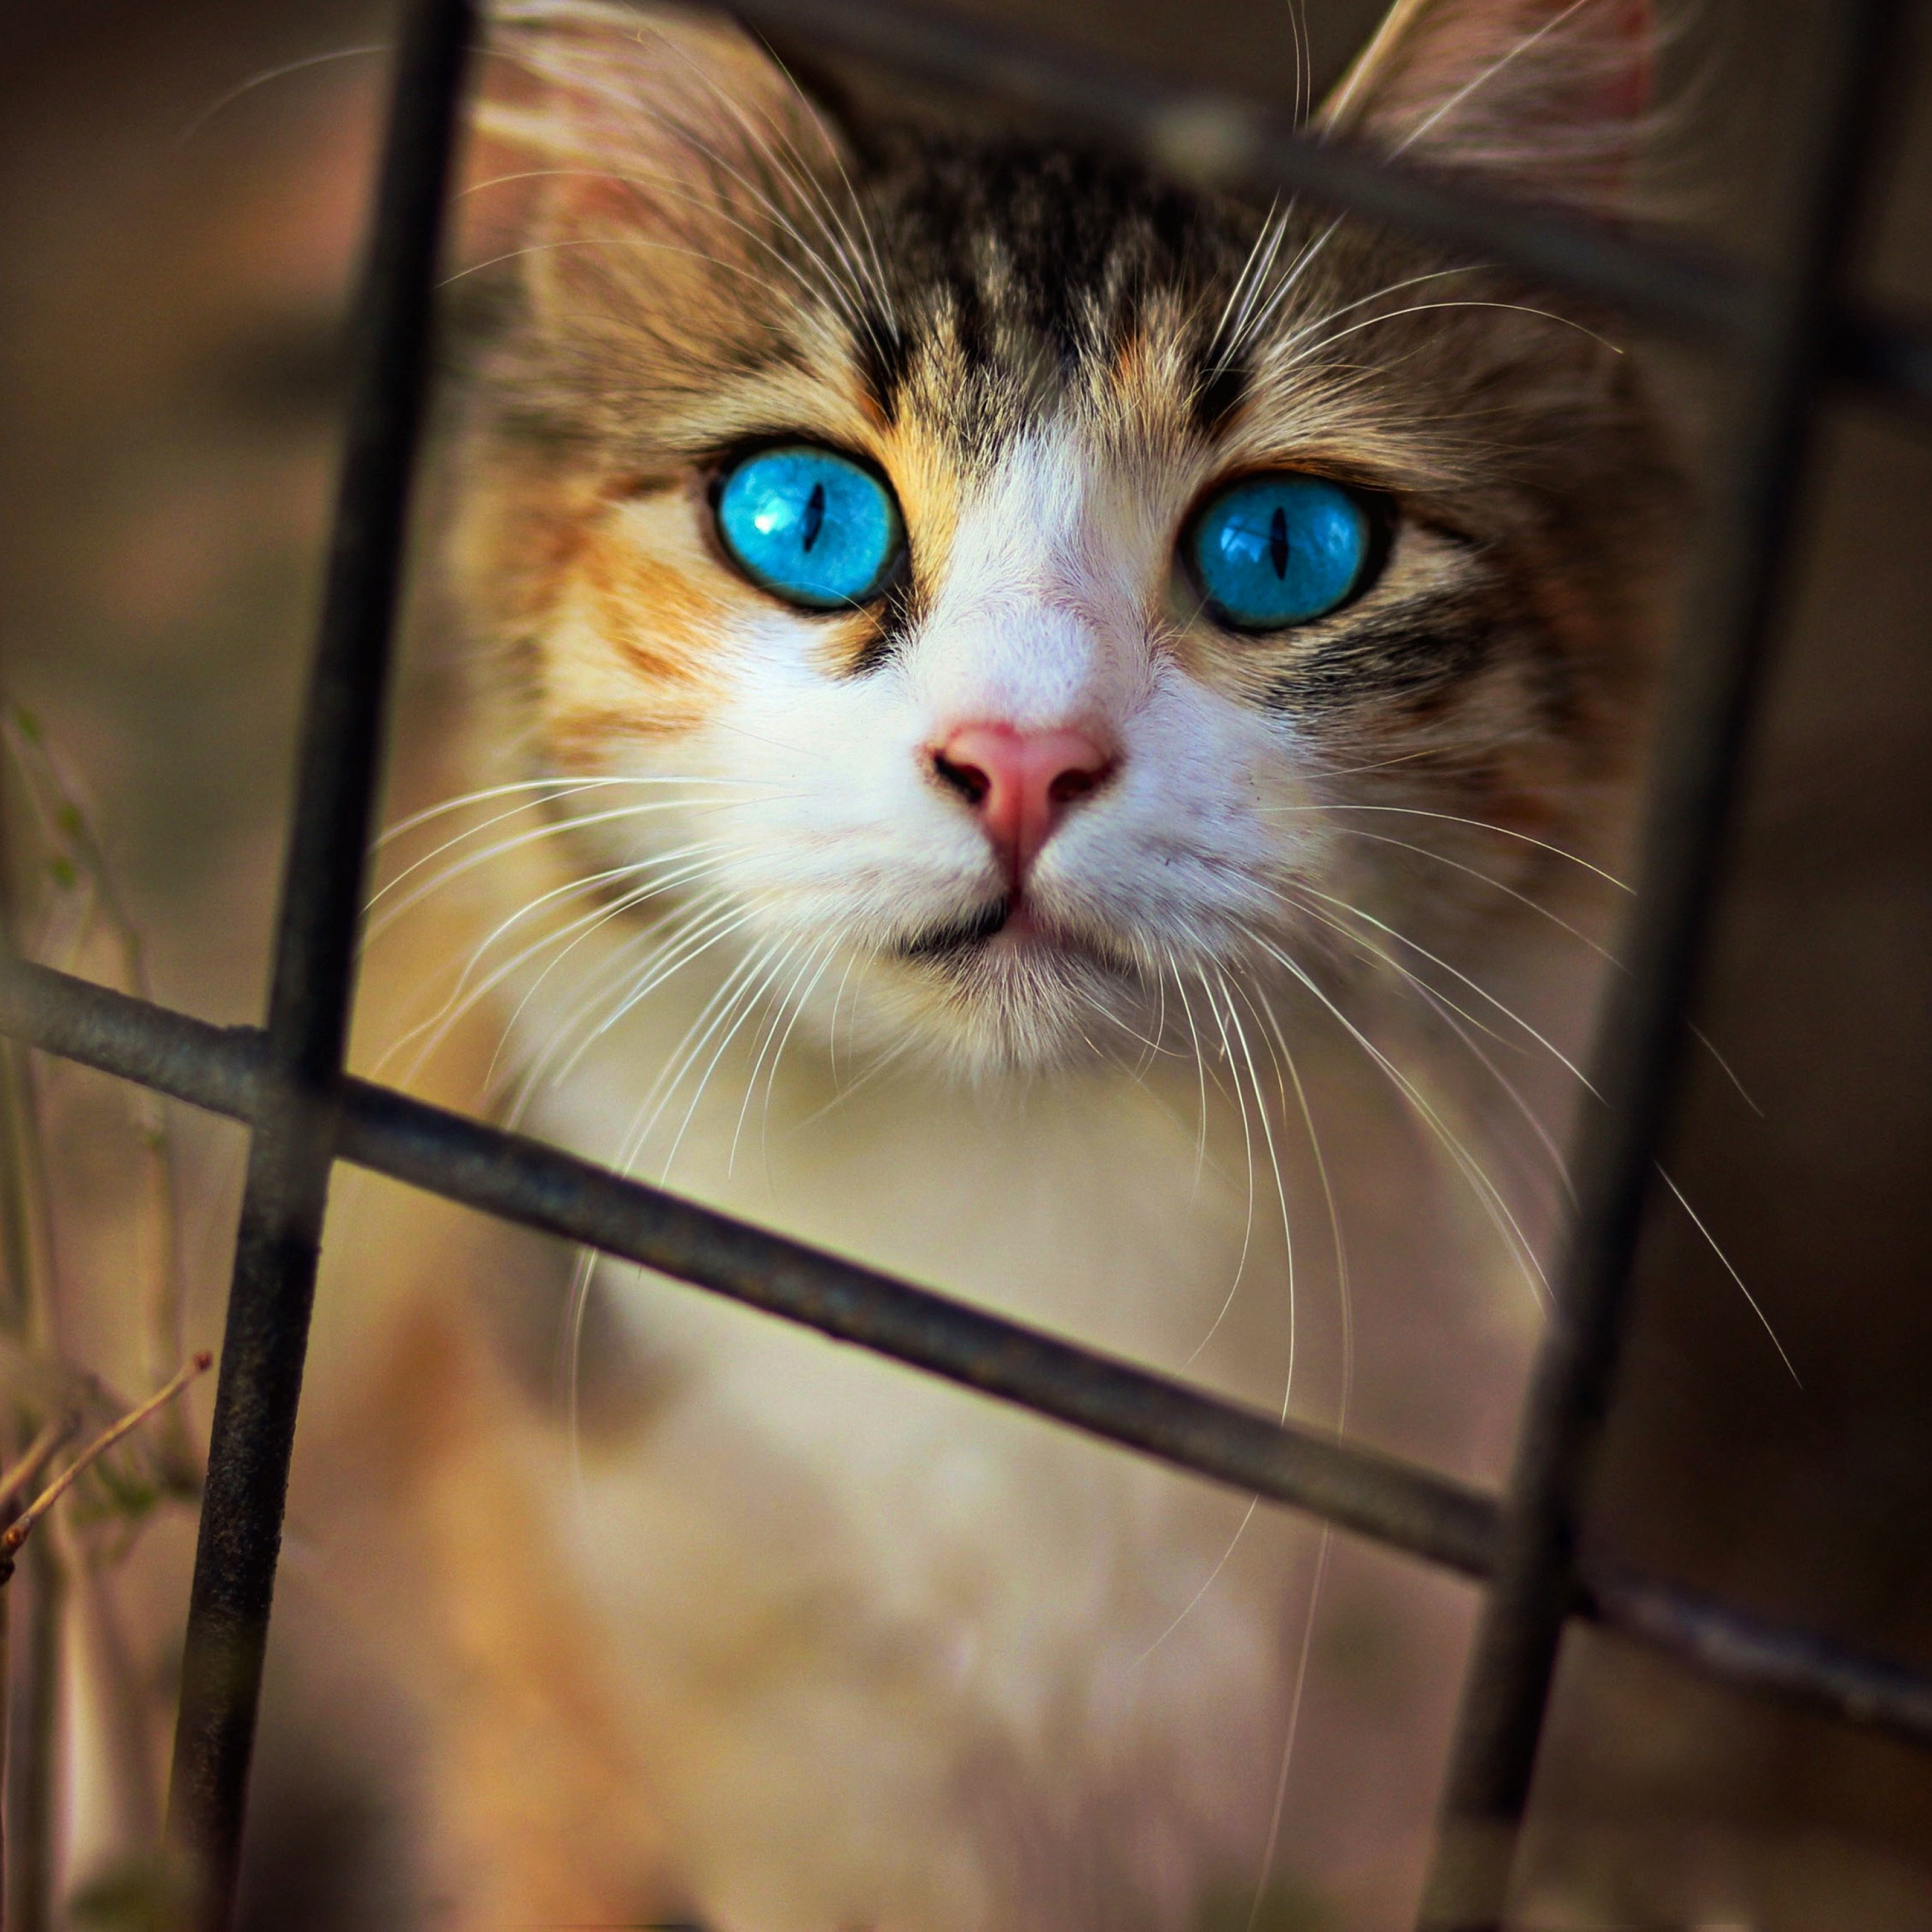 Cat Blue Eyes iPad Pro Retina Display HD 4k Wallpaper, Image, Background, Photo and Picture